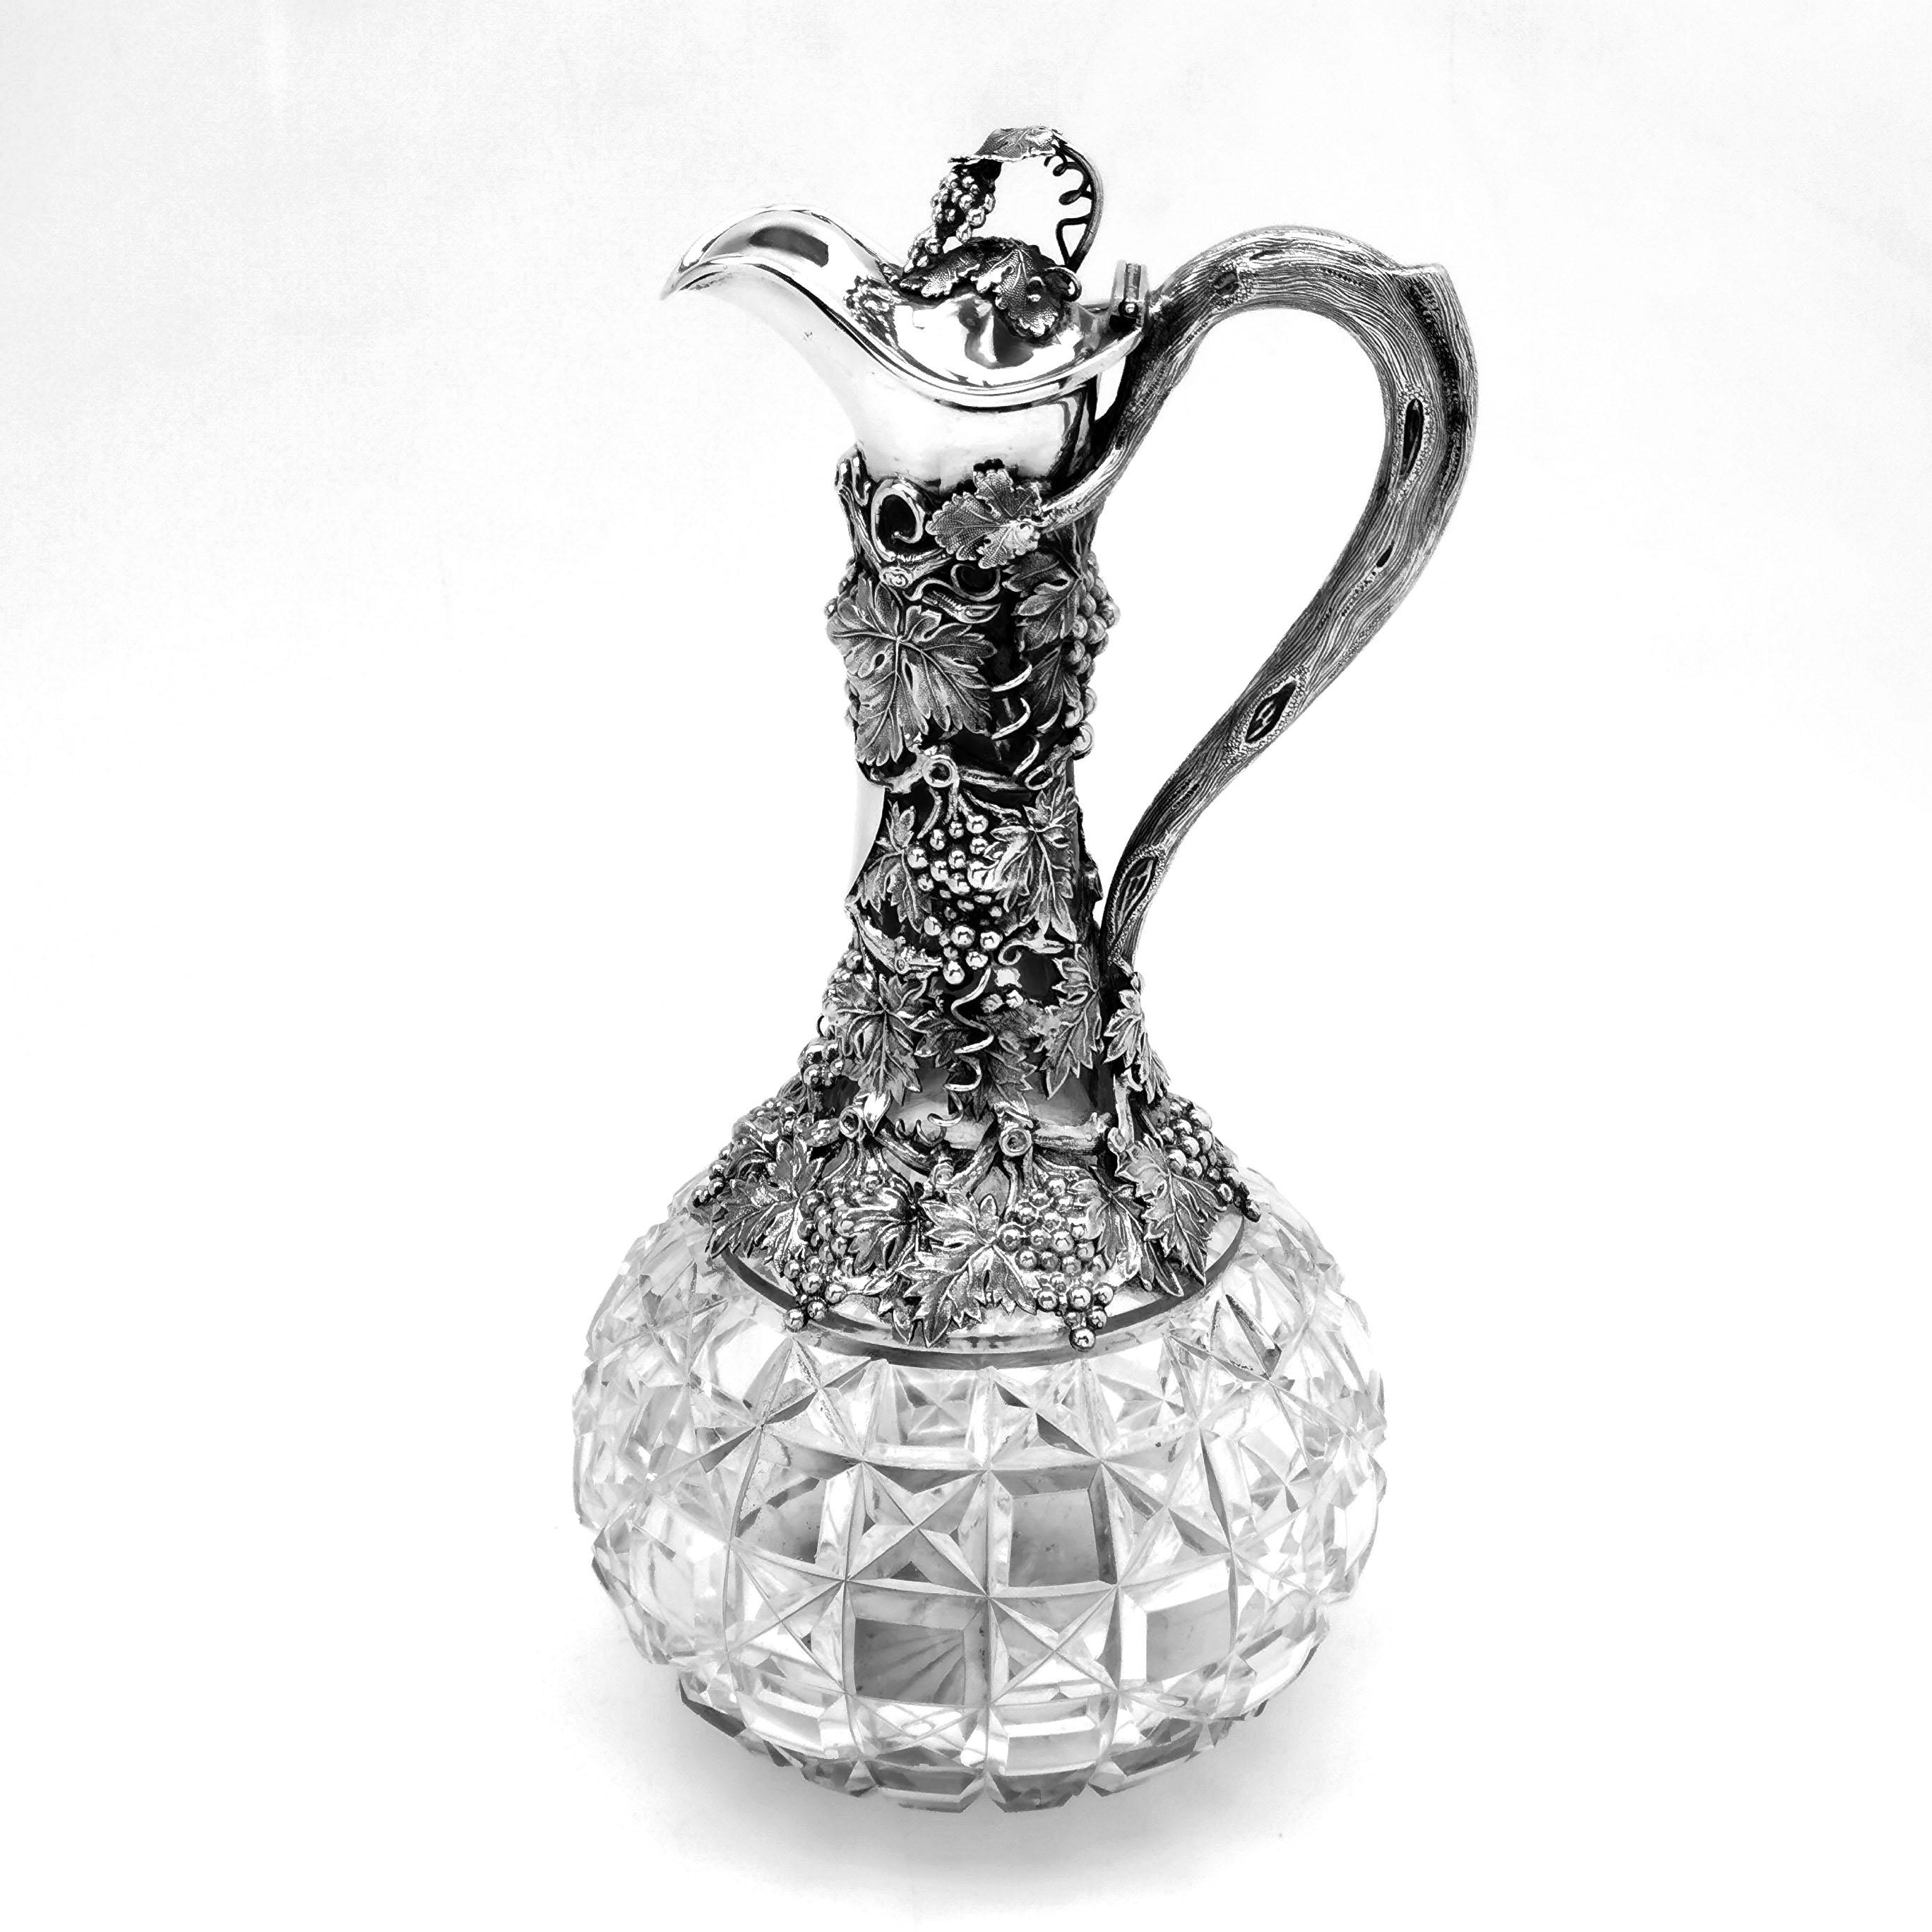 An antique Victorian sterling silver mounted claret jug with a cut glass body. The silver neck of the claret jug has an intricate grape vine design showing bunches of grapes and detailed leaves culminating in the handle of the jug designed to look